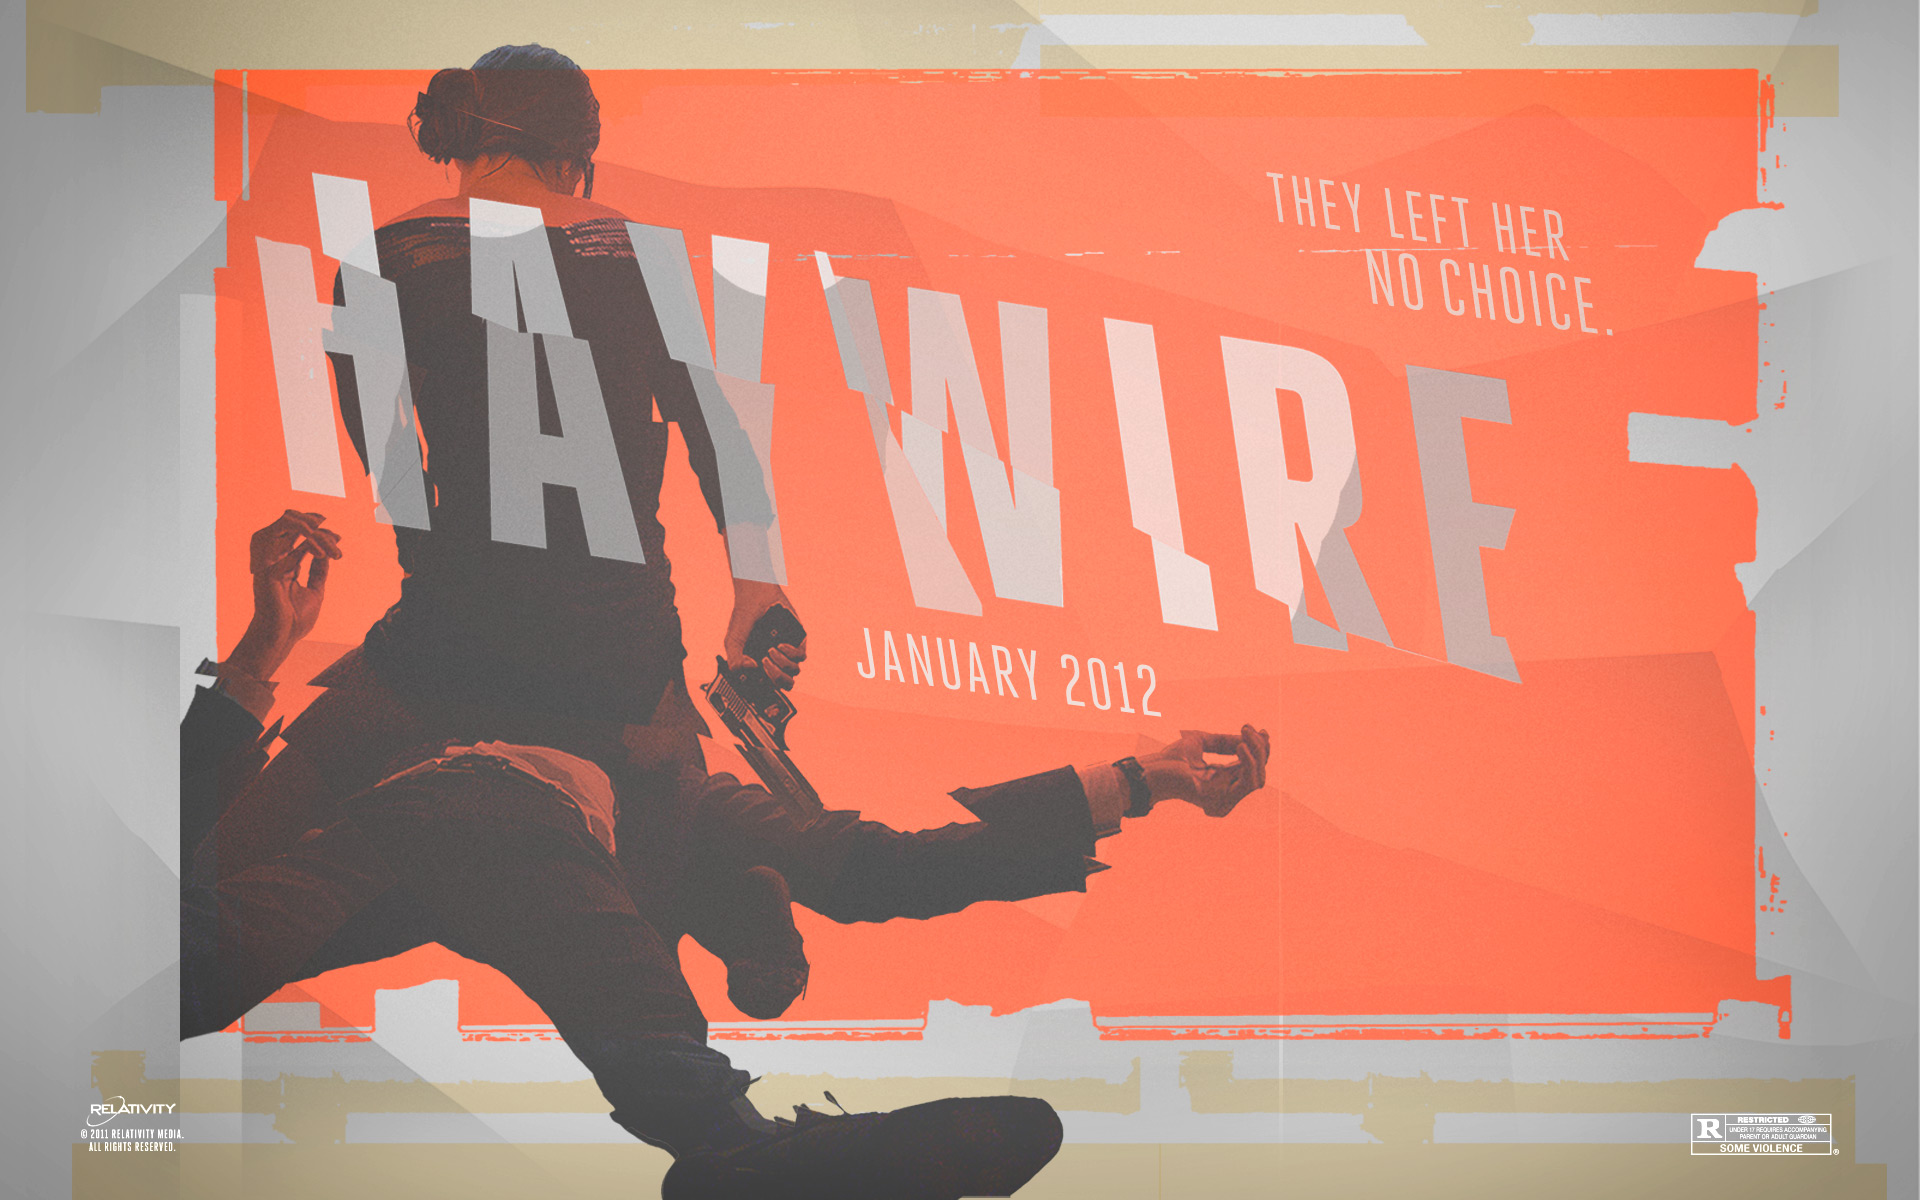 Haywire Wallpapers